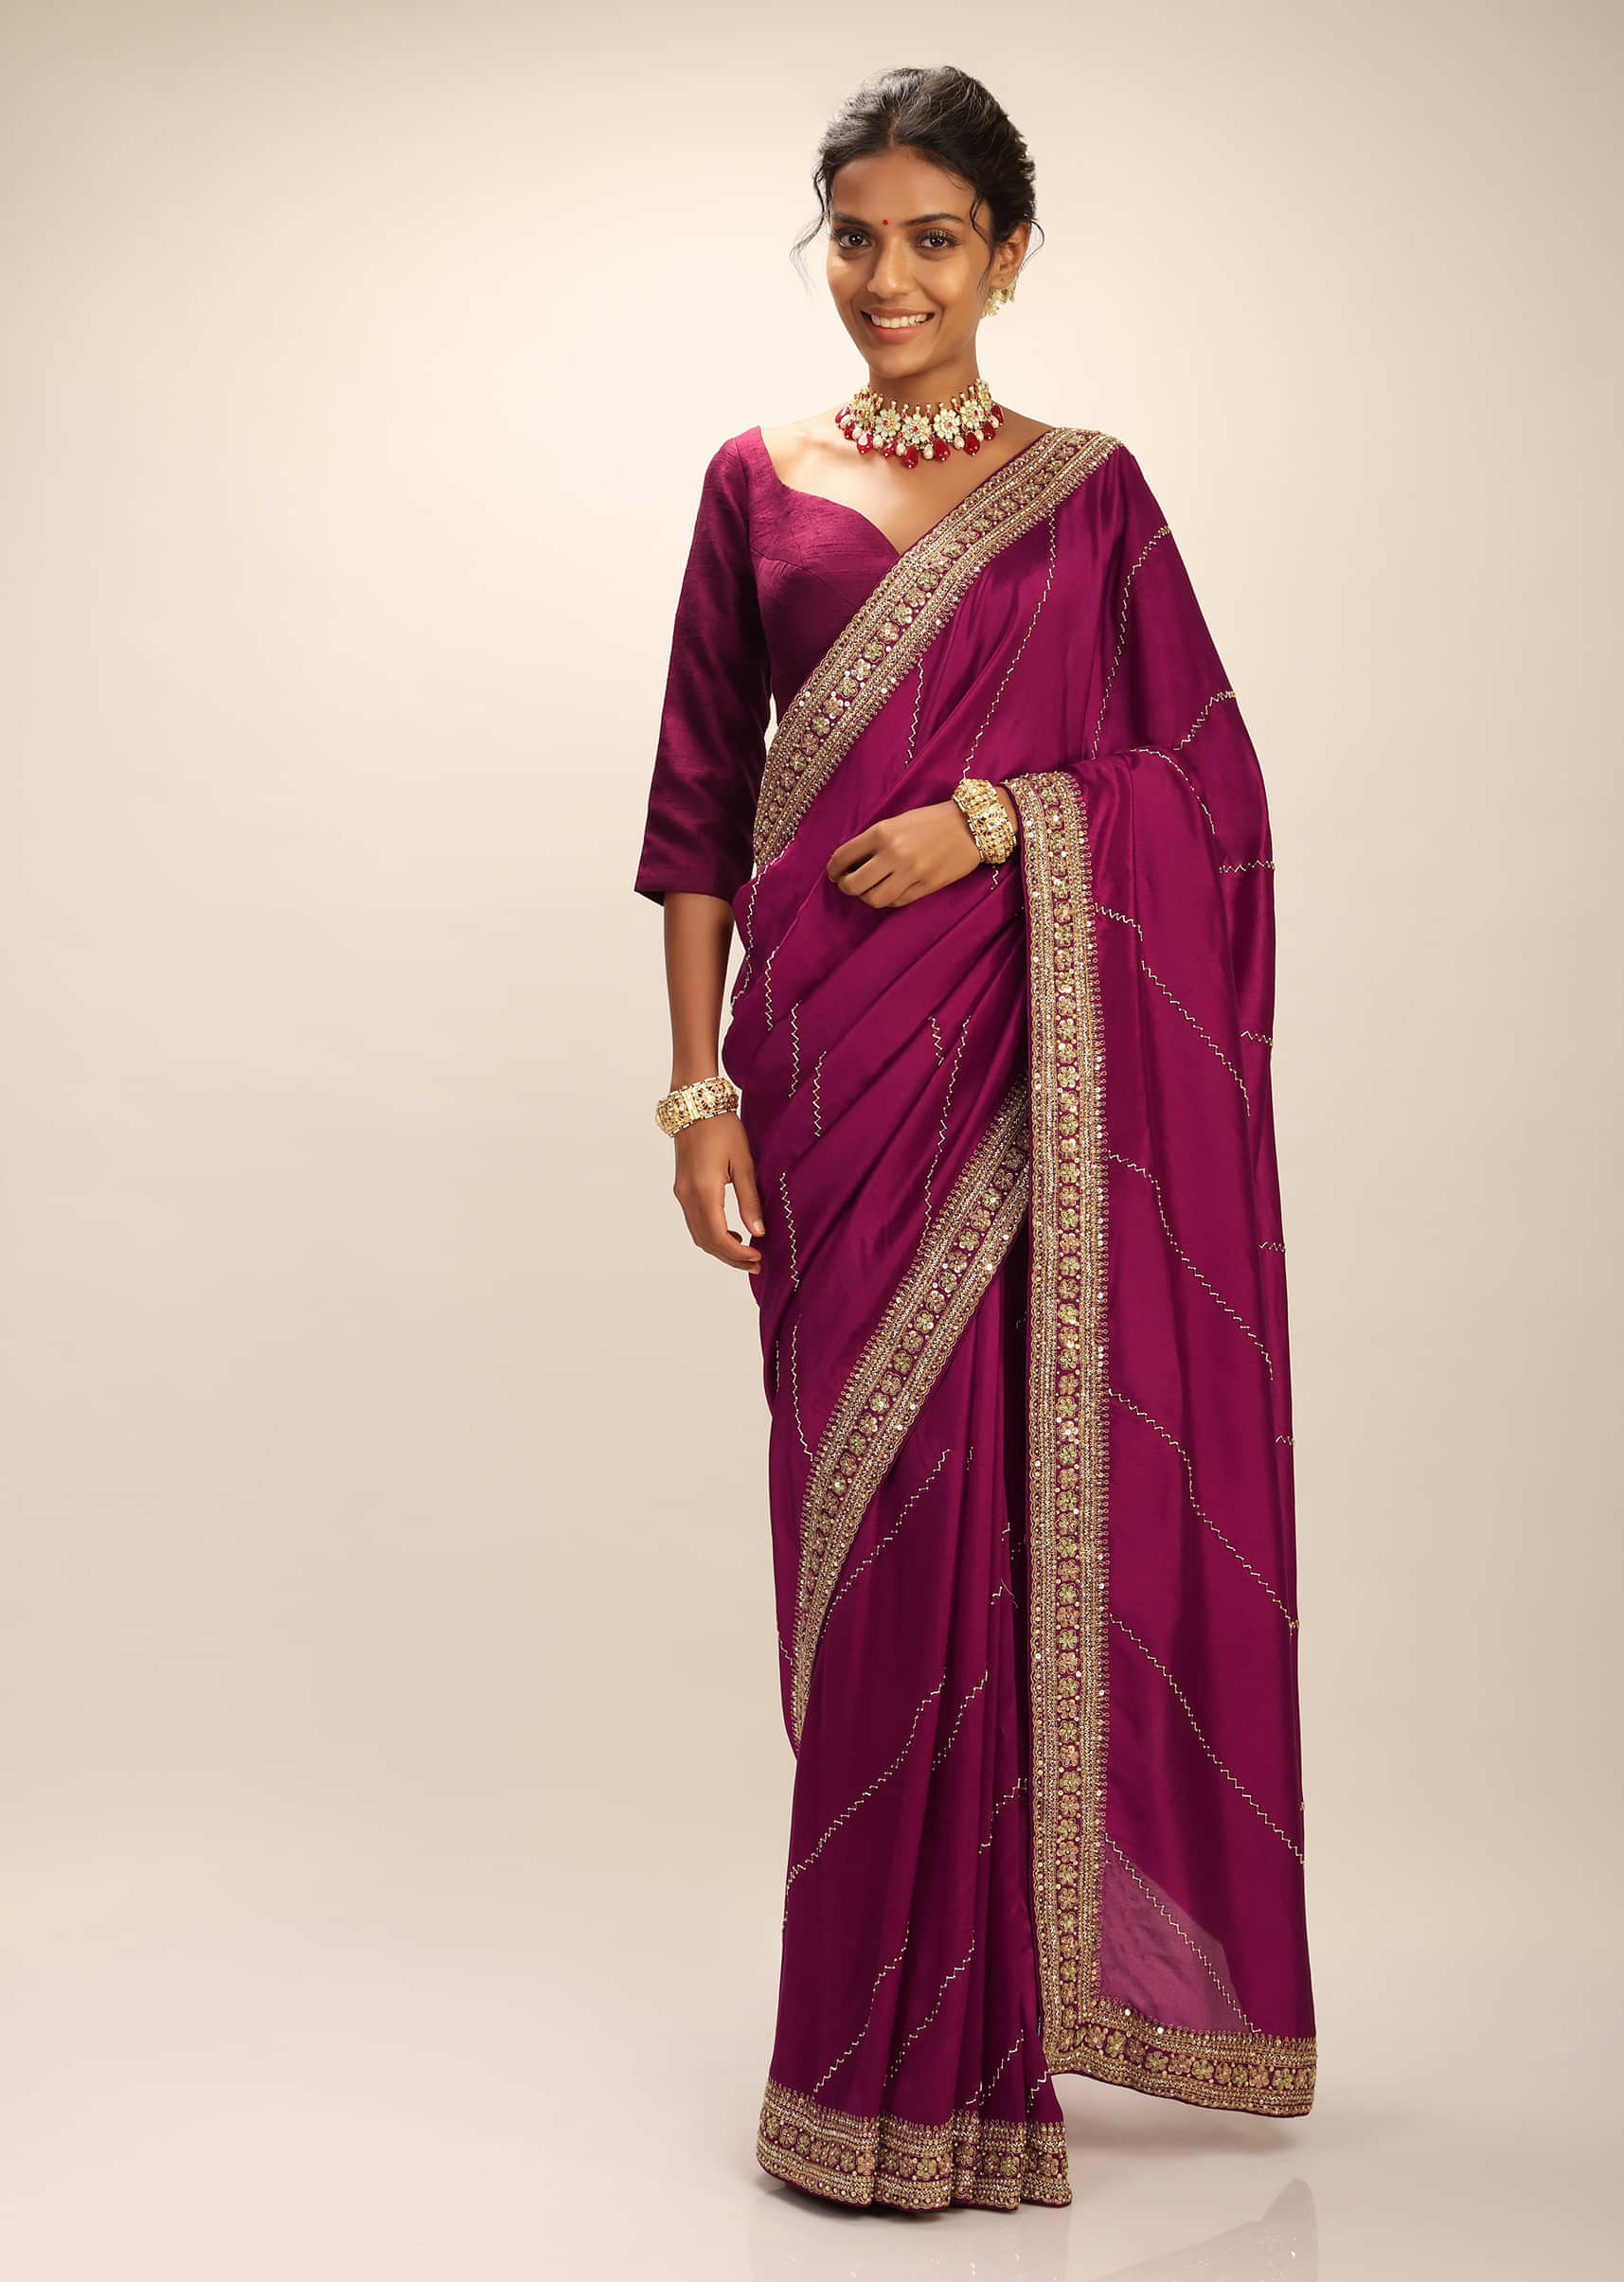 Wine Purple Saree In Dupion Silk With Cut Dana And Moti Embroidered Stripes And Floral Border  